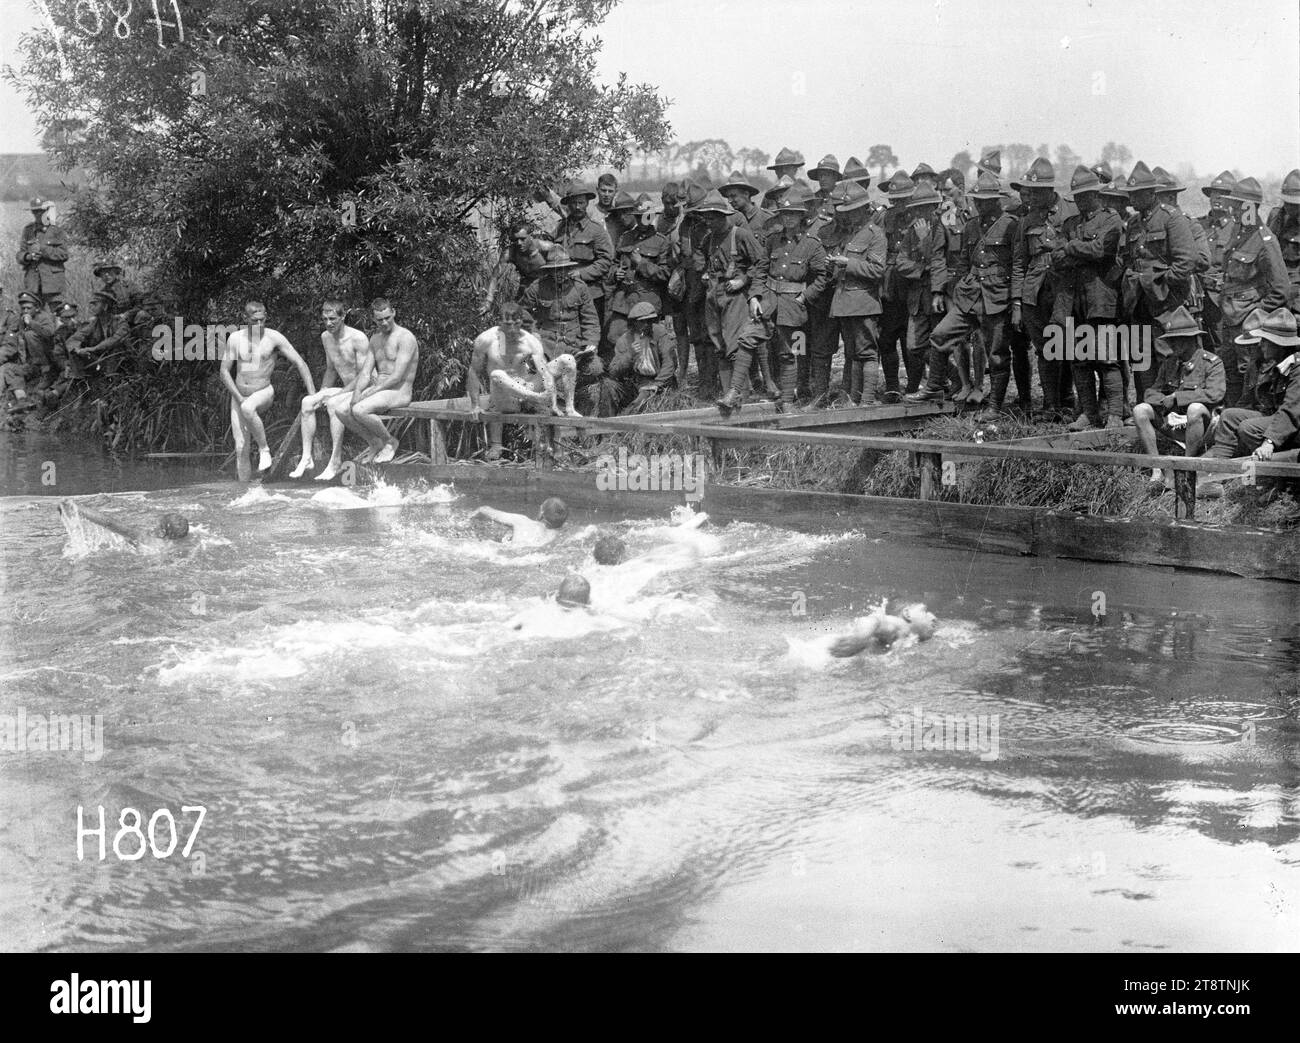 A close finish at the New Zealand Division water sports, World War I, A close finish of a swimming race at the New Zealand Division water sports in France during World War I. The swimmers are watched by soldiers on a bank above. Photograph taken 7 July 1917 Stock Photo